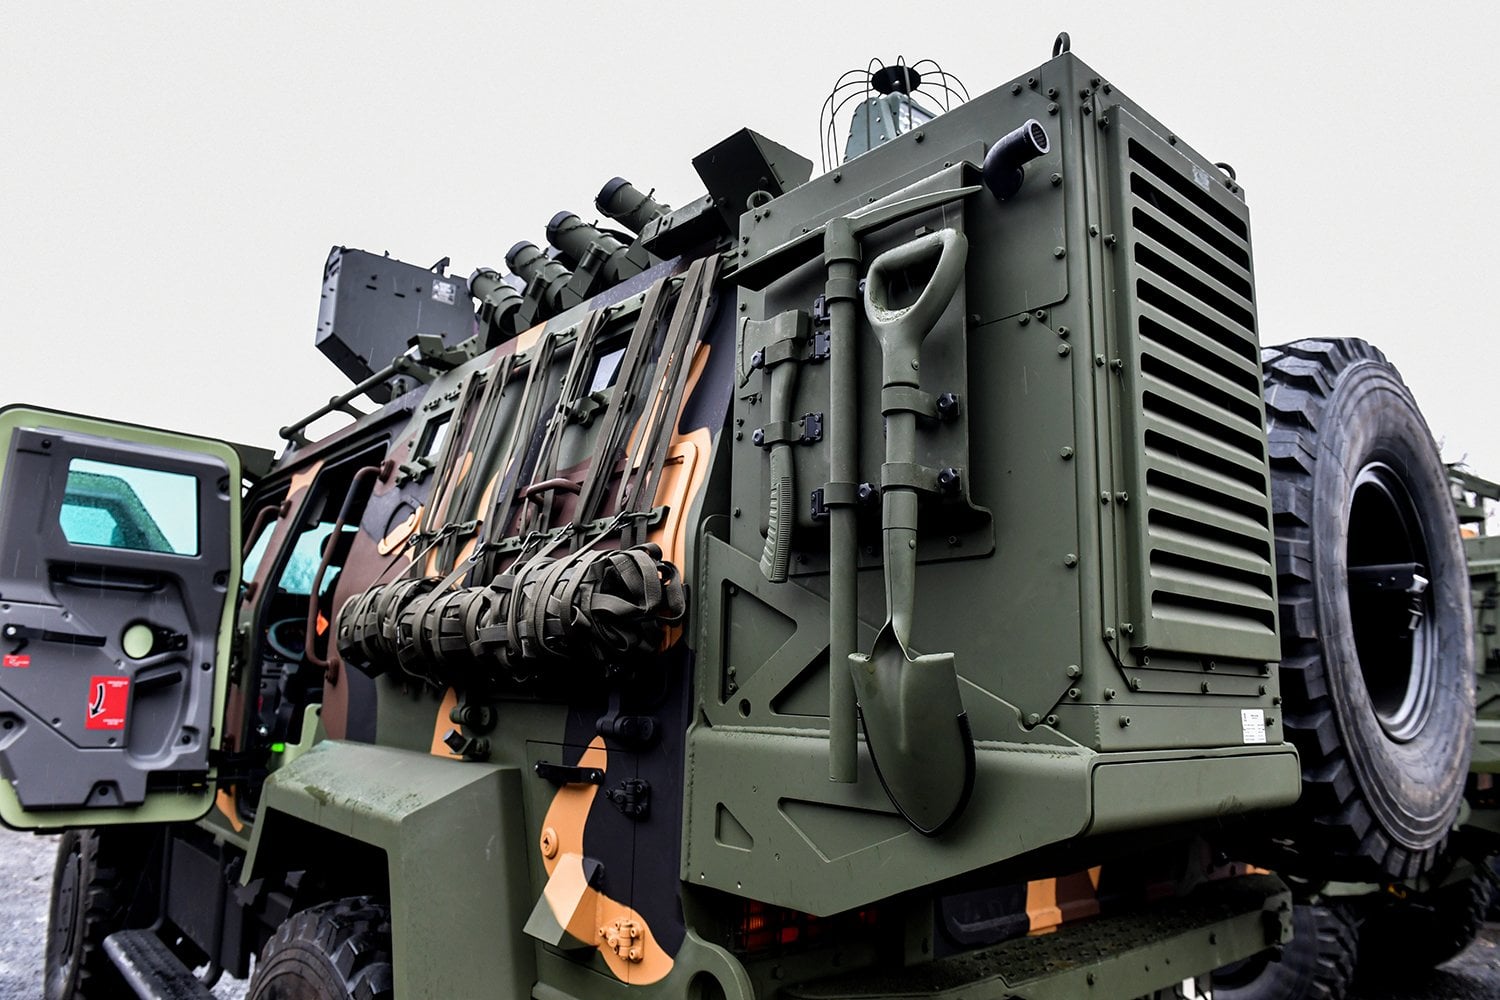 Hungarian Army Takes Delivery of Gidran 4x4 Wheeled Armored Vehicles